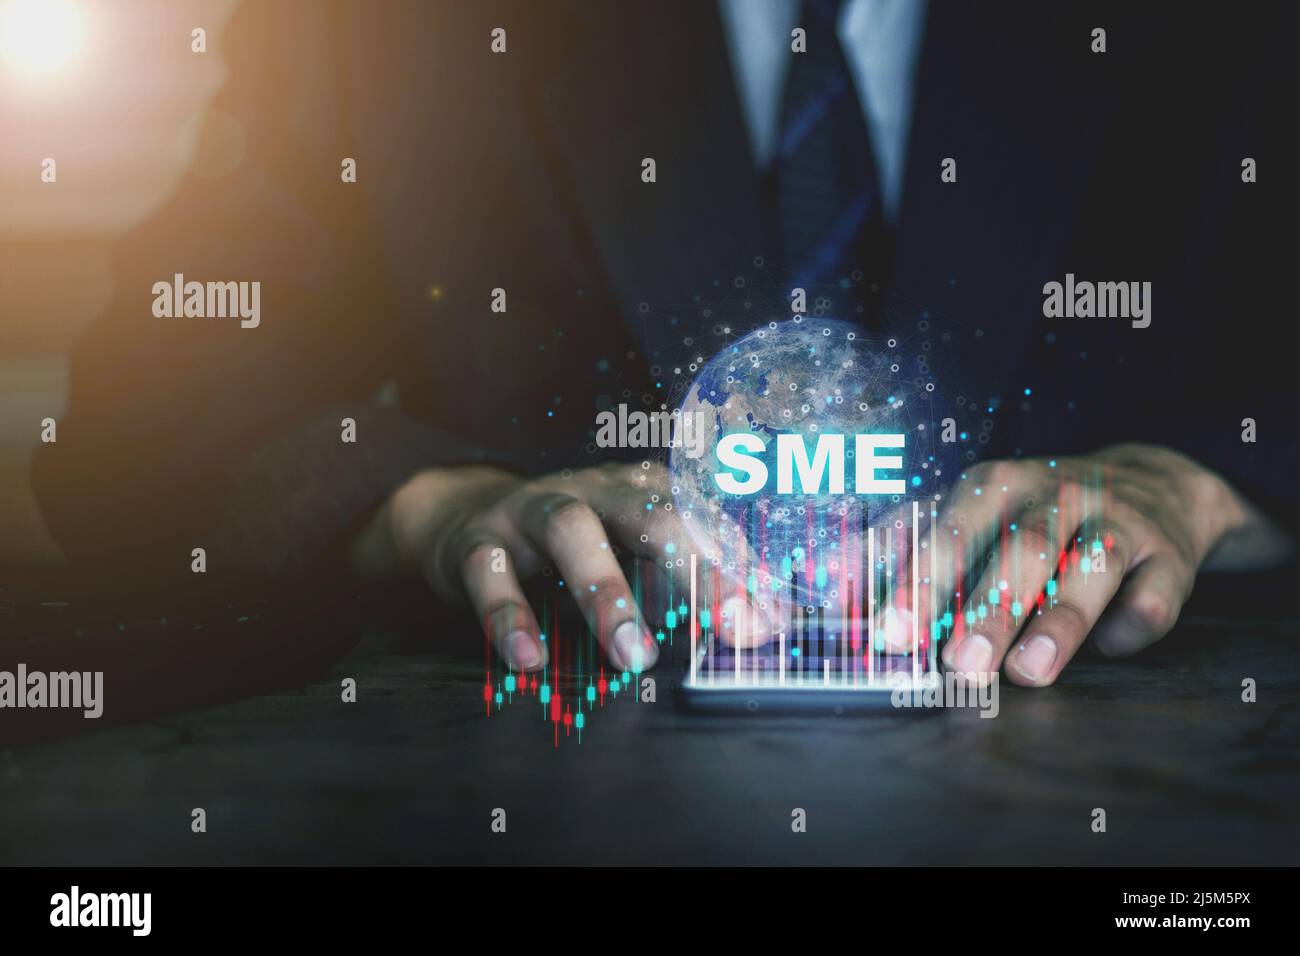 SME (or small and medium enterprises) signed with the icon network on business phone Stock Photo